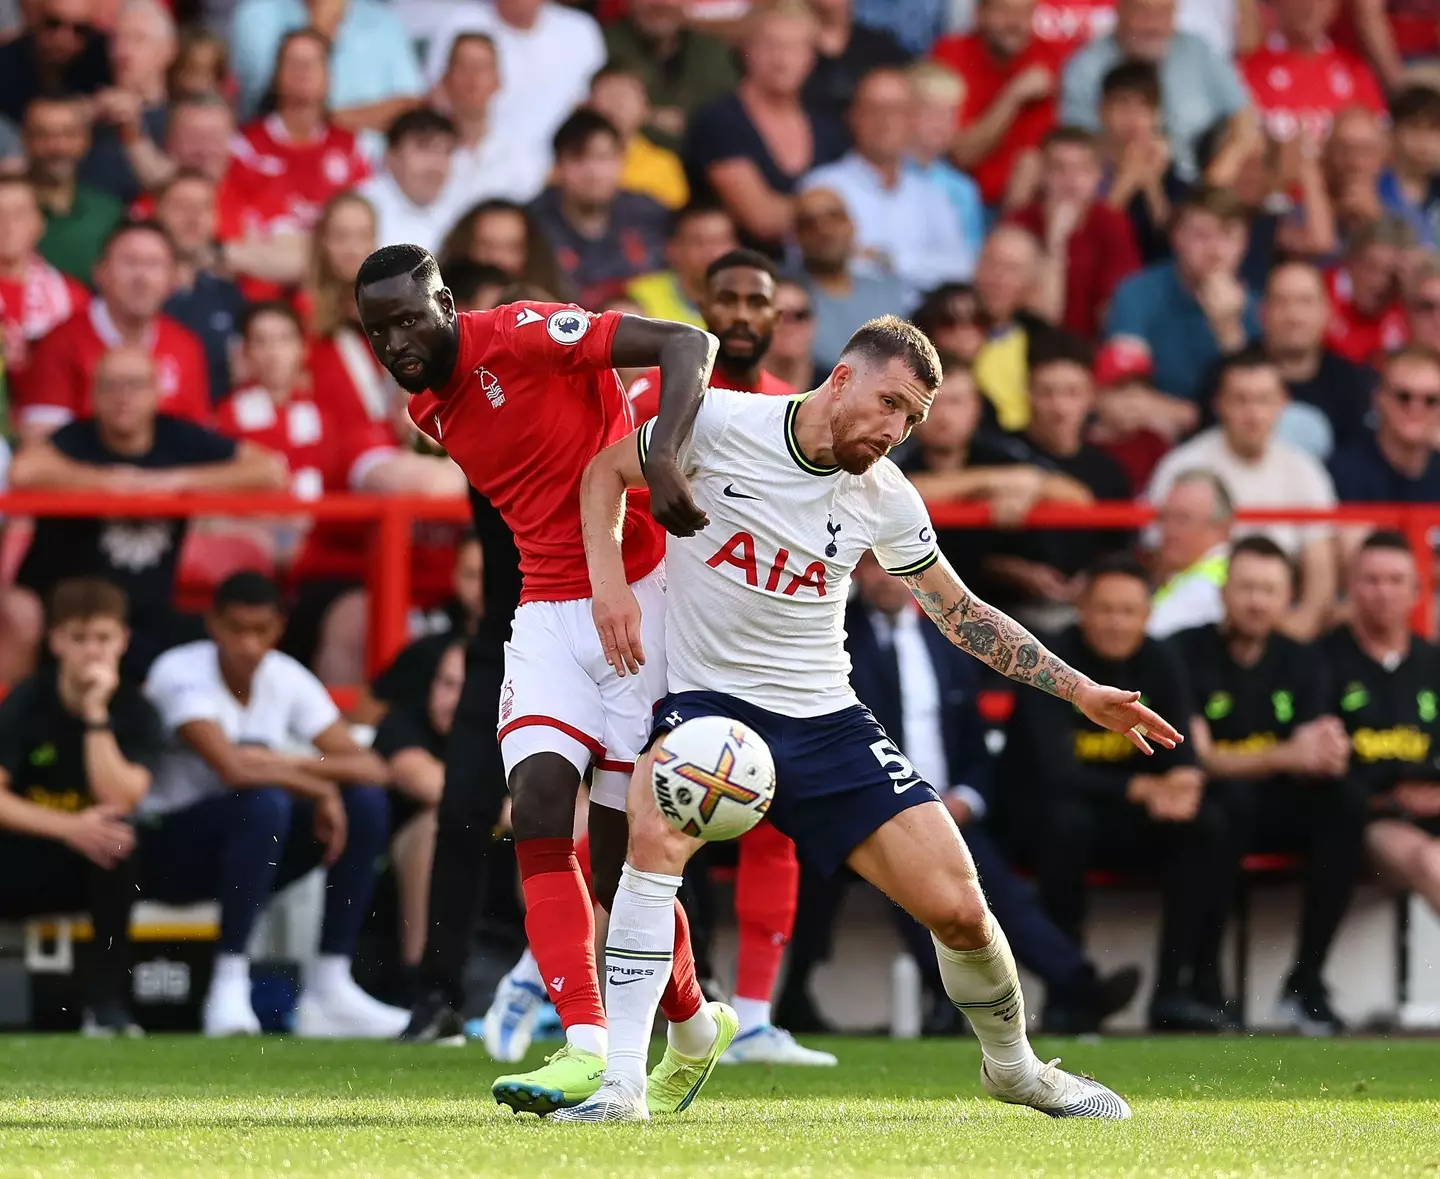 The incident occurred at Sunday's match between Nottingham Forest and Tottenham (Image: Alamy)